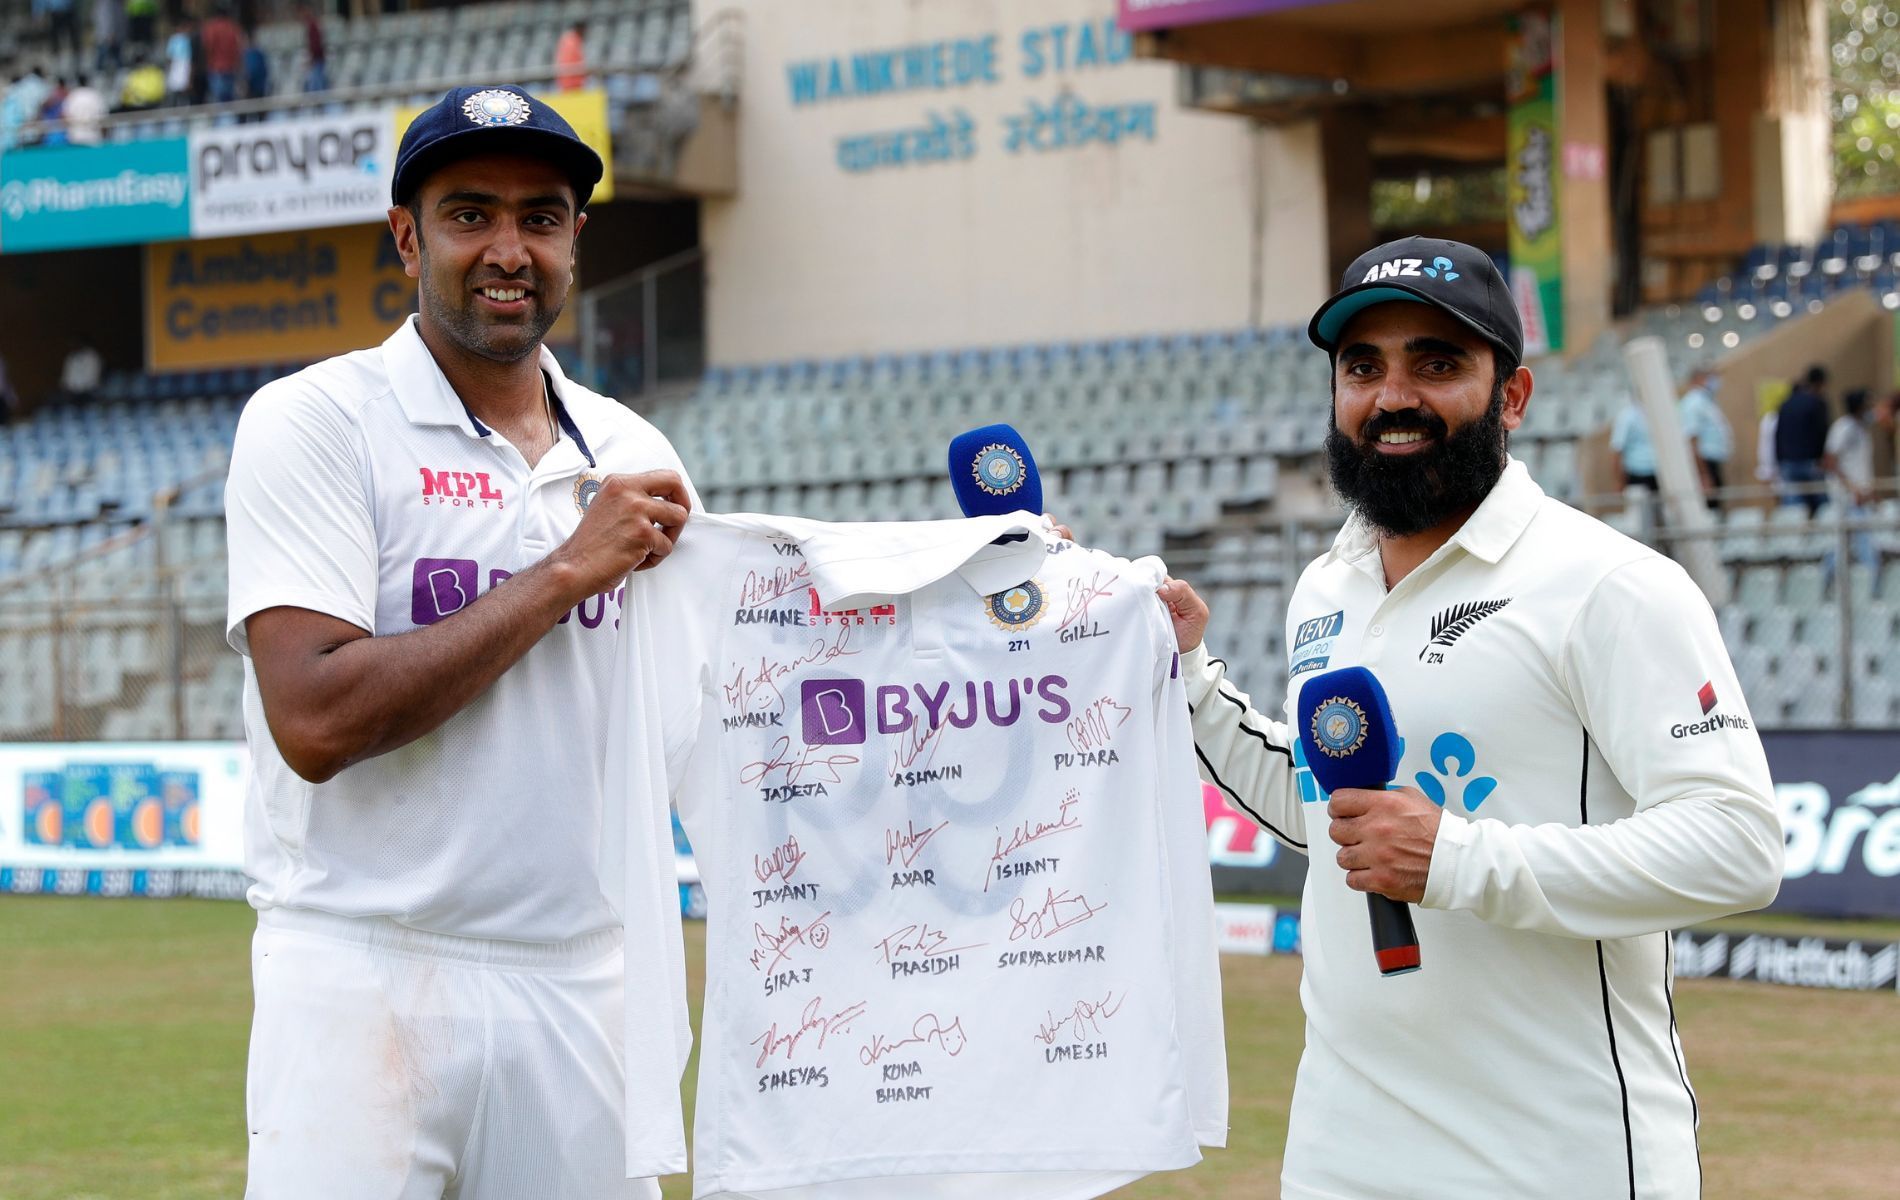 Ravichandran Ashwin presented Ajaz Patel with a jersey signed by the entire Indian team.